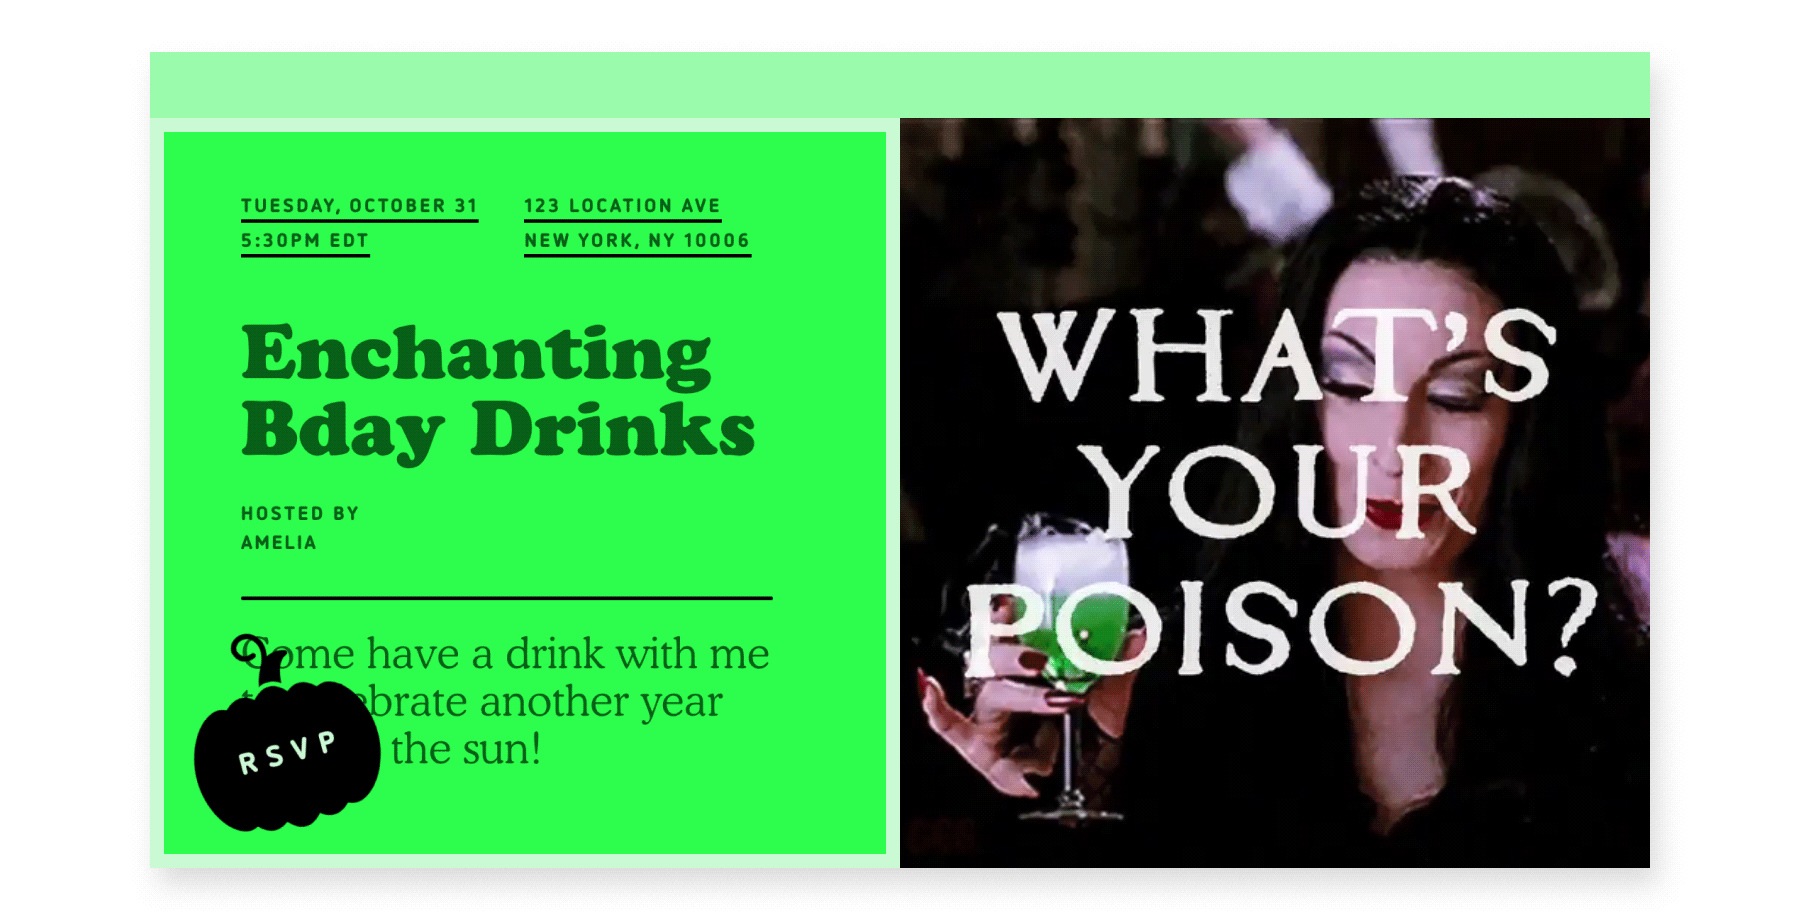 An online invite for “Enchanting Bday Drinks” is fluorescent green on the left and on the right, an animation of Morticia Addams holding a smoking green drink with the phrase “What’s your poison” imposed on top.